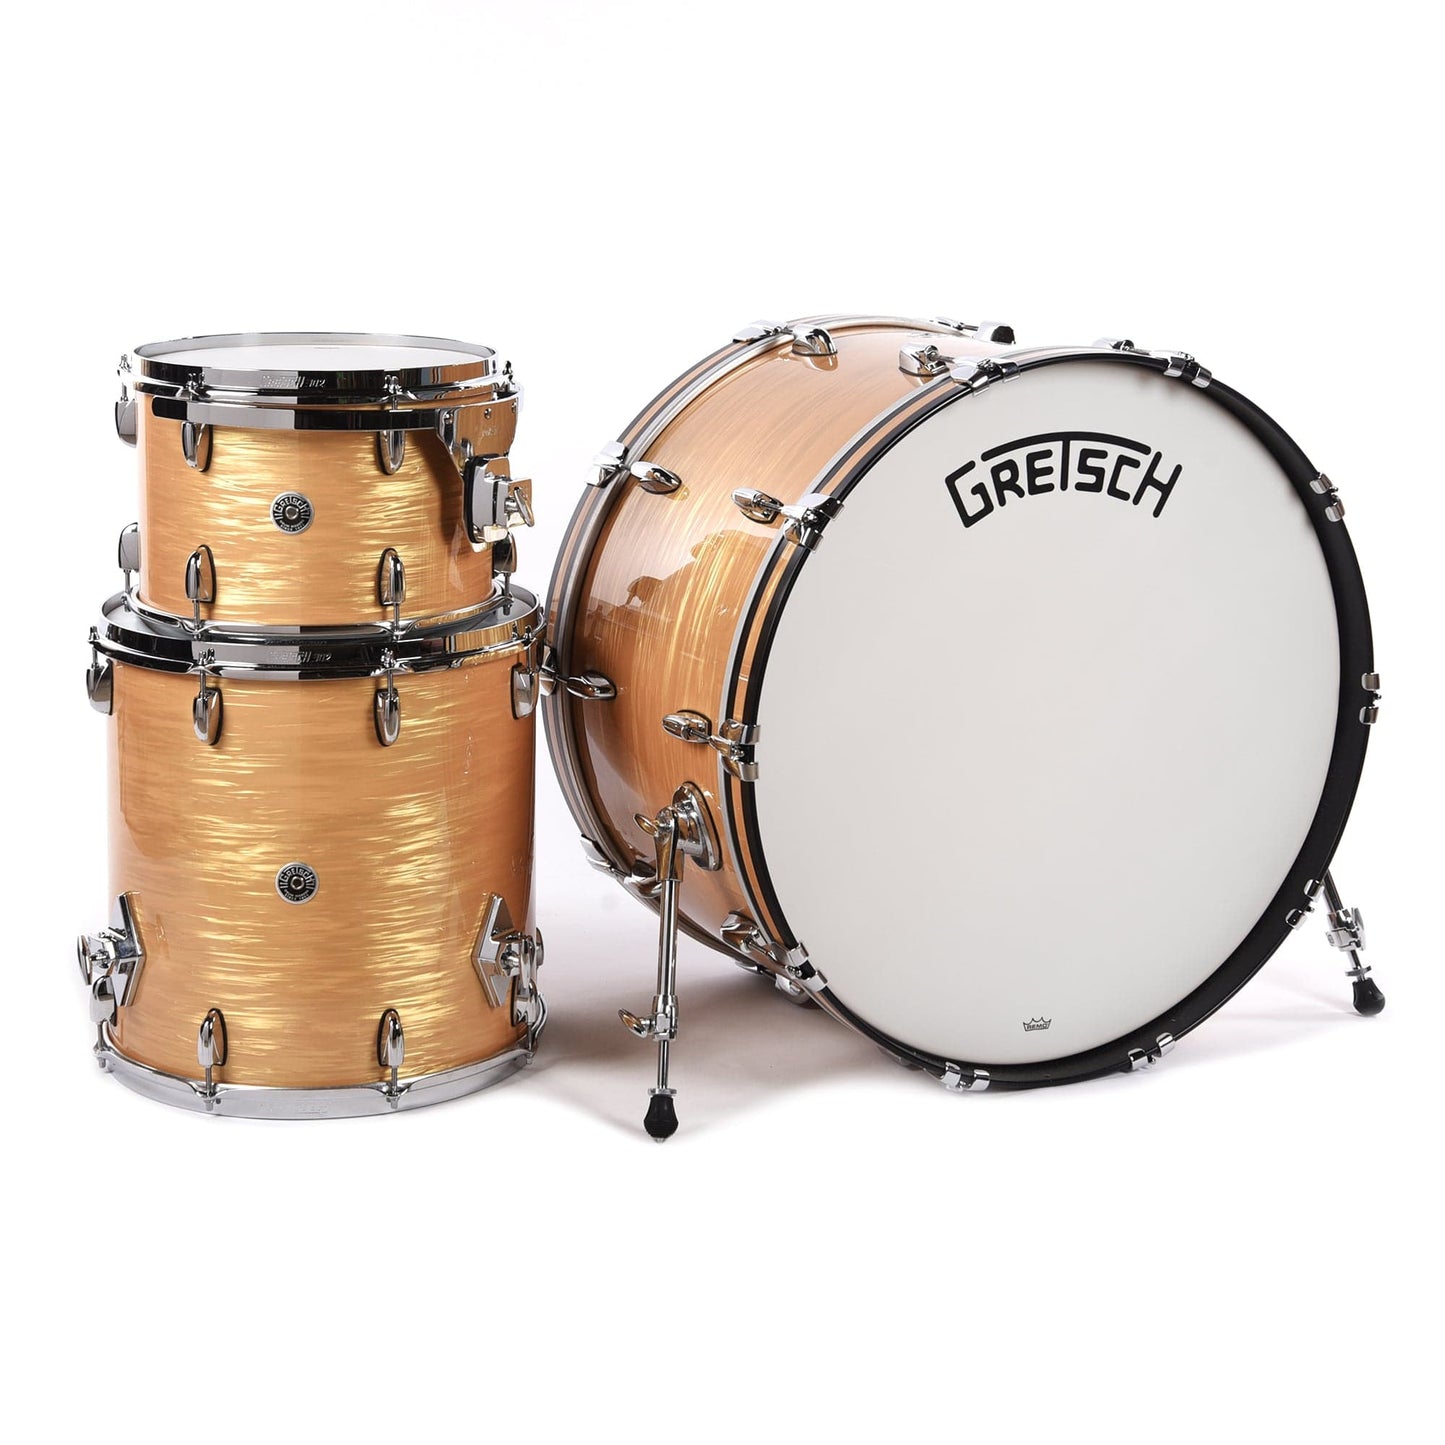 Gretsch Brooklyn 13/16/26 3pc. Drum Kit Antique Oyster Drums and Percussion / Acoustic Drums / Full Acoustic Kits